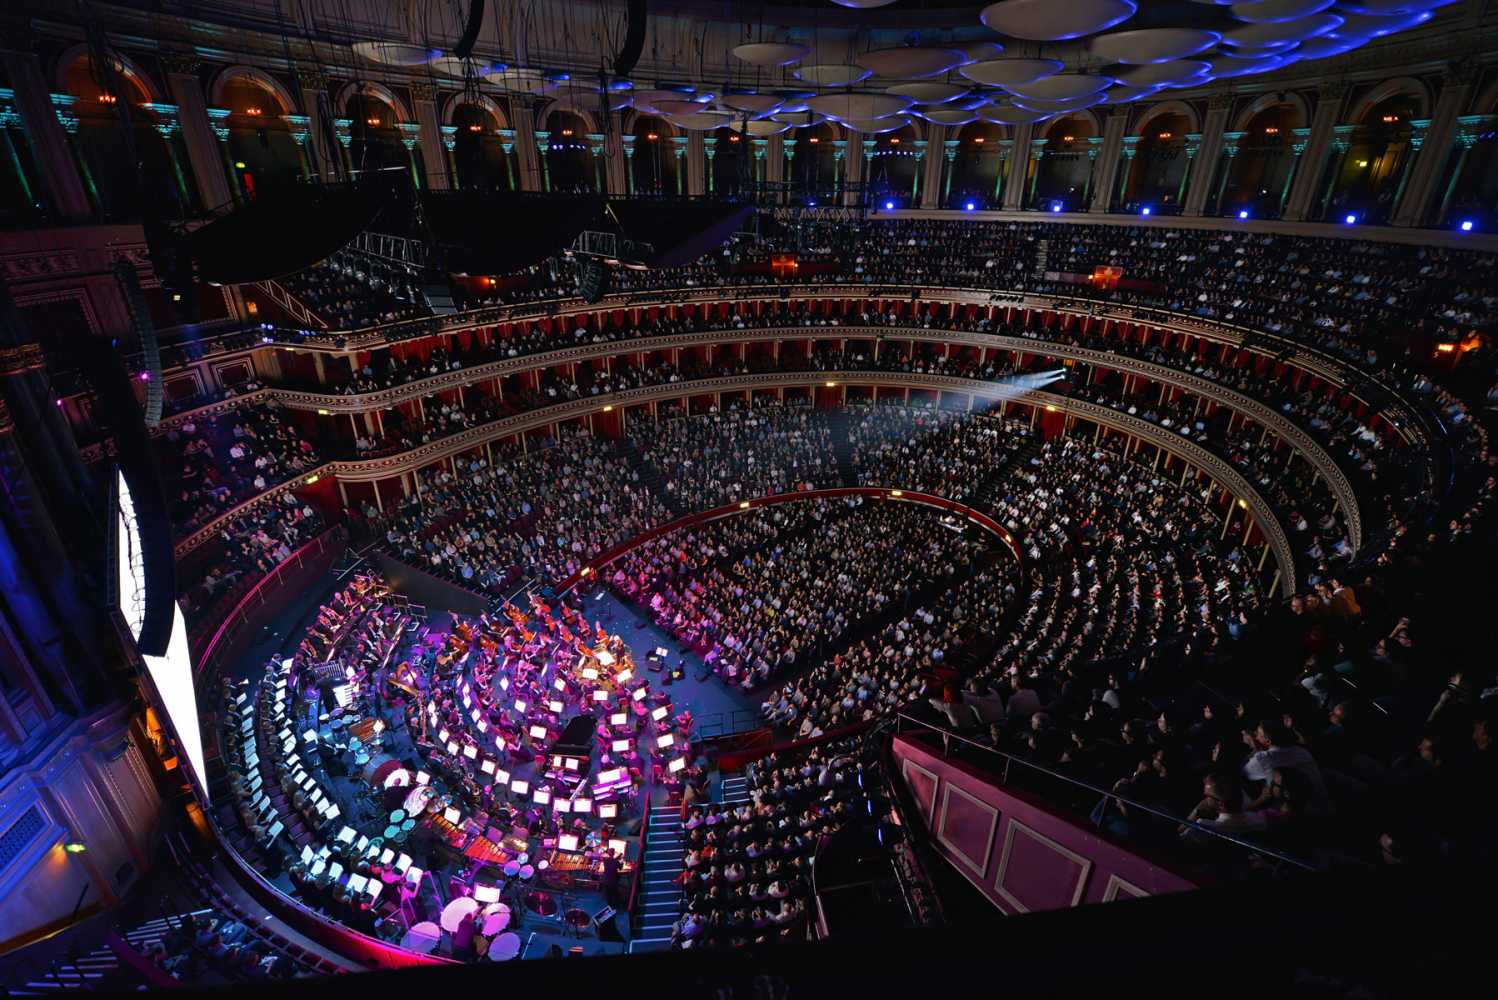 The Royal Albert Hall is ‘more than a venue’